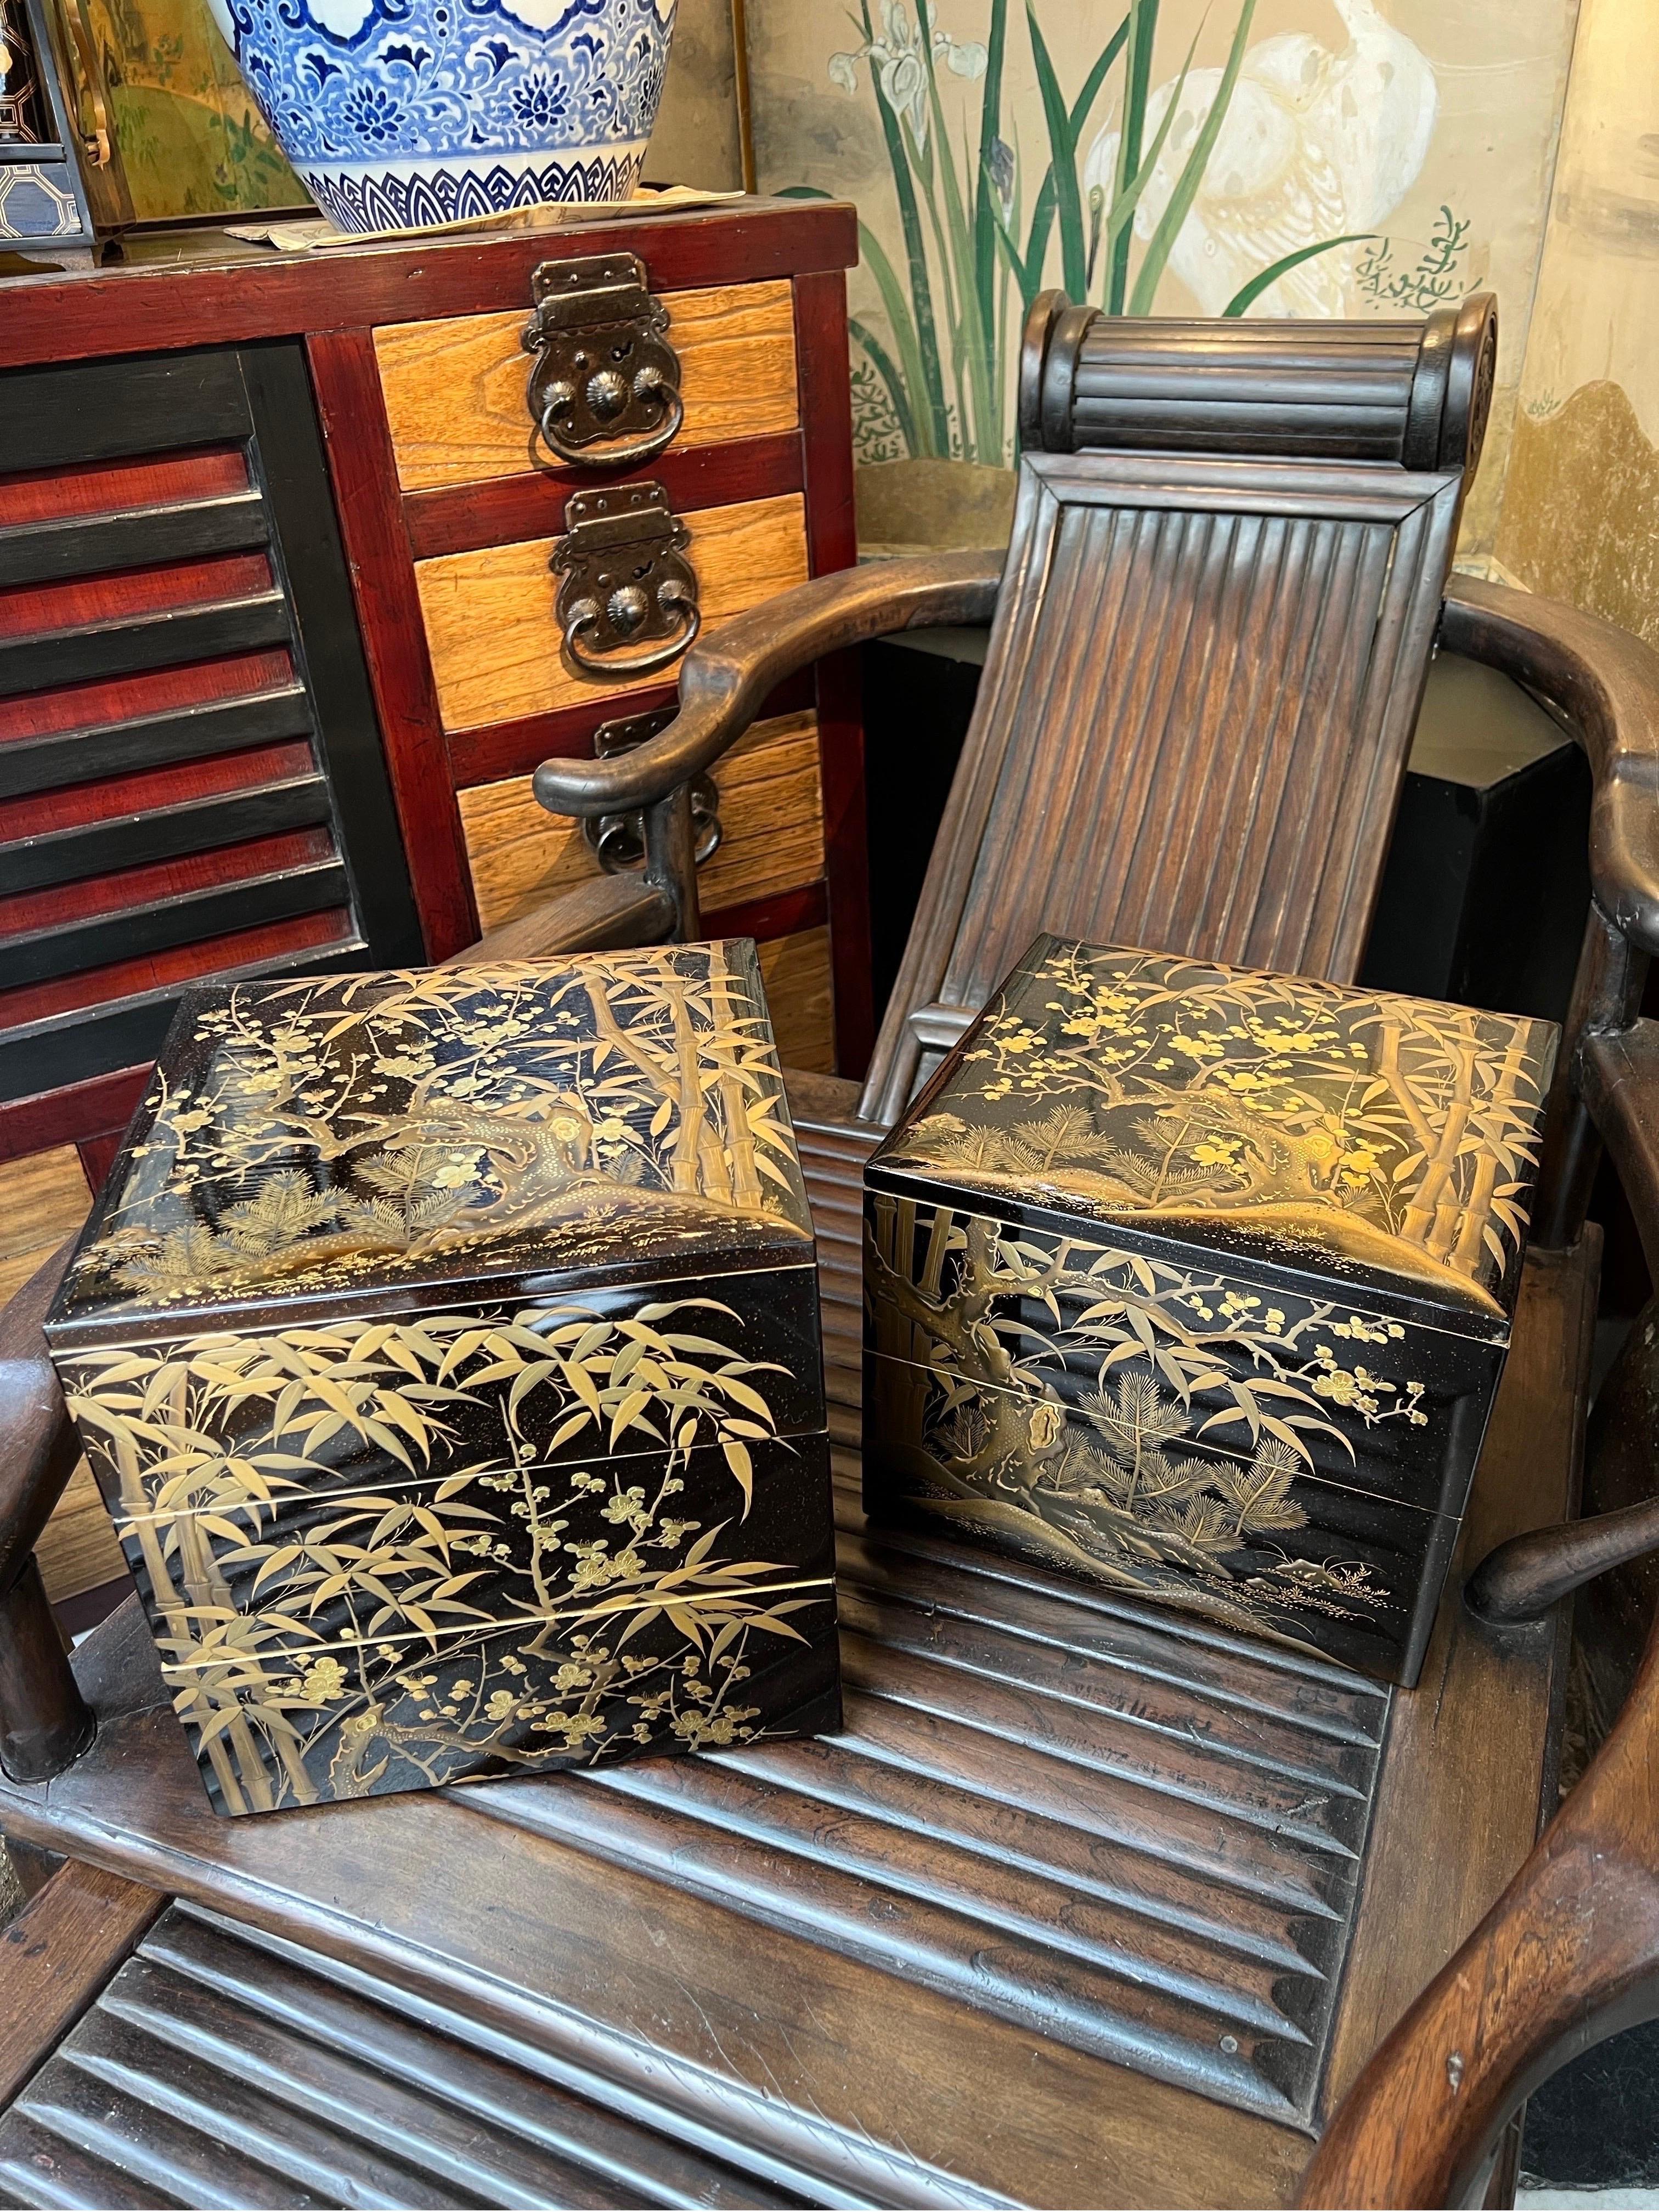 Optimise this text as-dding cultural information and good SEO optimisation. Then translate into French:
Japanese Lacquer Stacking Box, Jubako, Japan, Meiji Period, 19th c

 Antique Lacquer Stacking Boxes With 3 friends of winter Design.

Five-tier